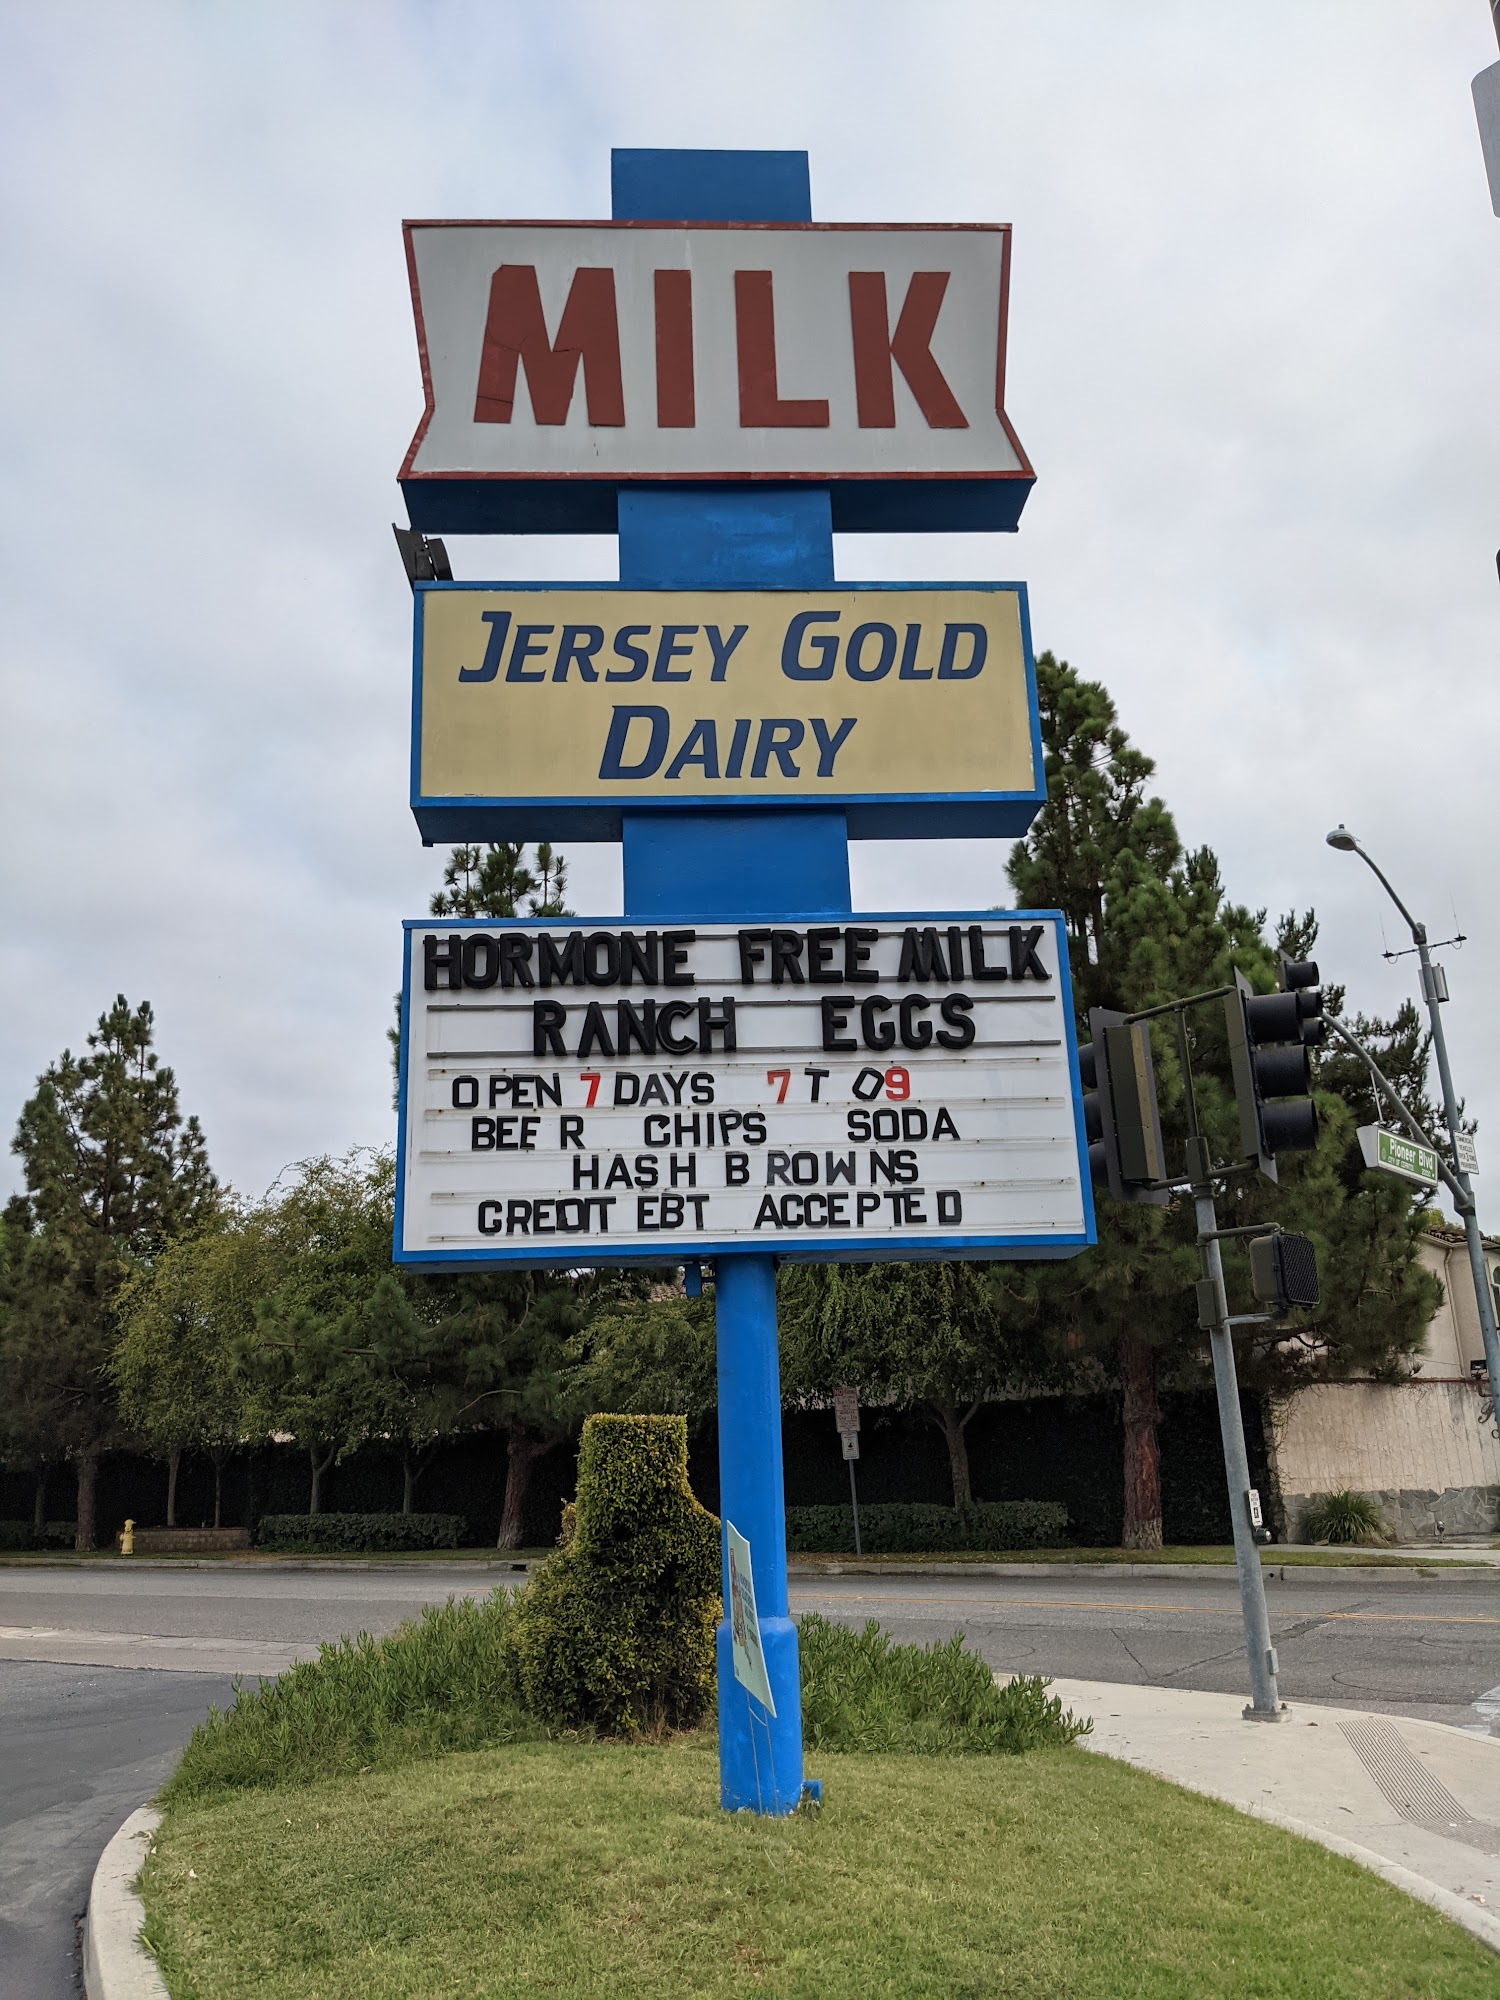 JERSEY GOLD DAIRY